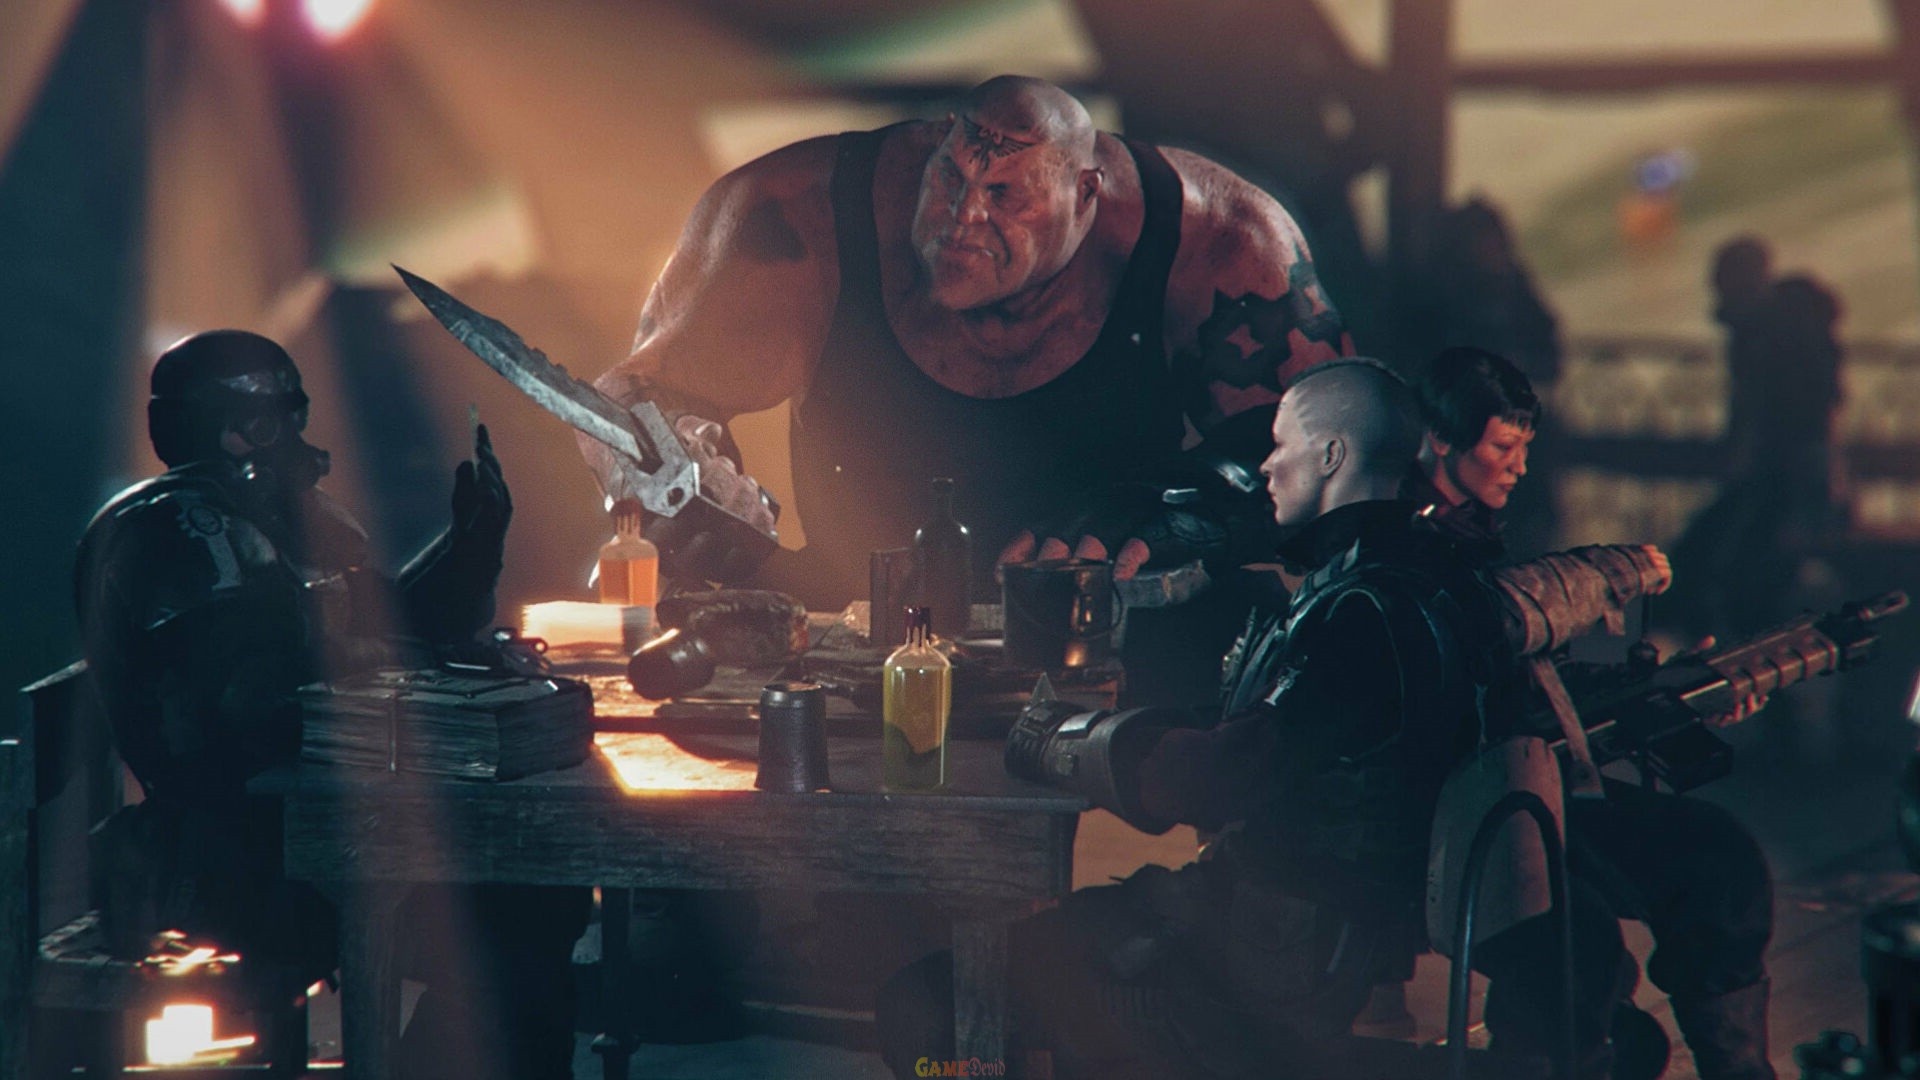 Warhammer 40 000: Darktide: An Imperial Guardsman and an Ogryn, The playable characters. 1920x1080 Full HD Wallpaper.